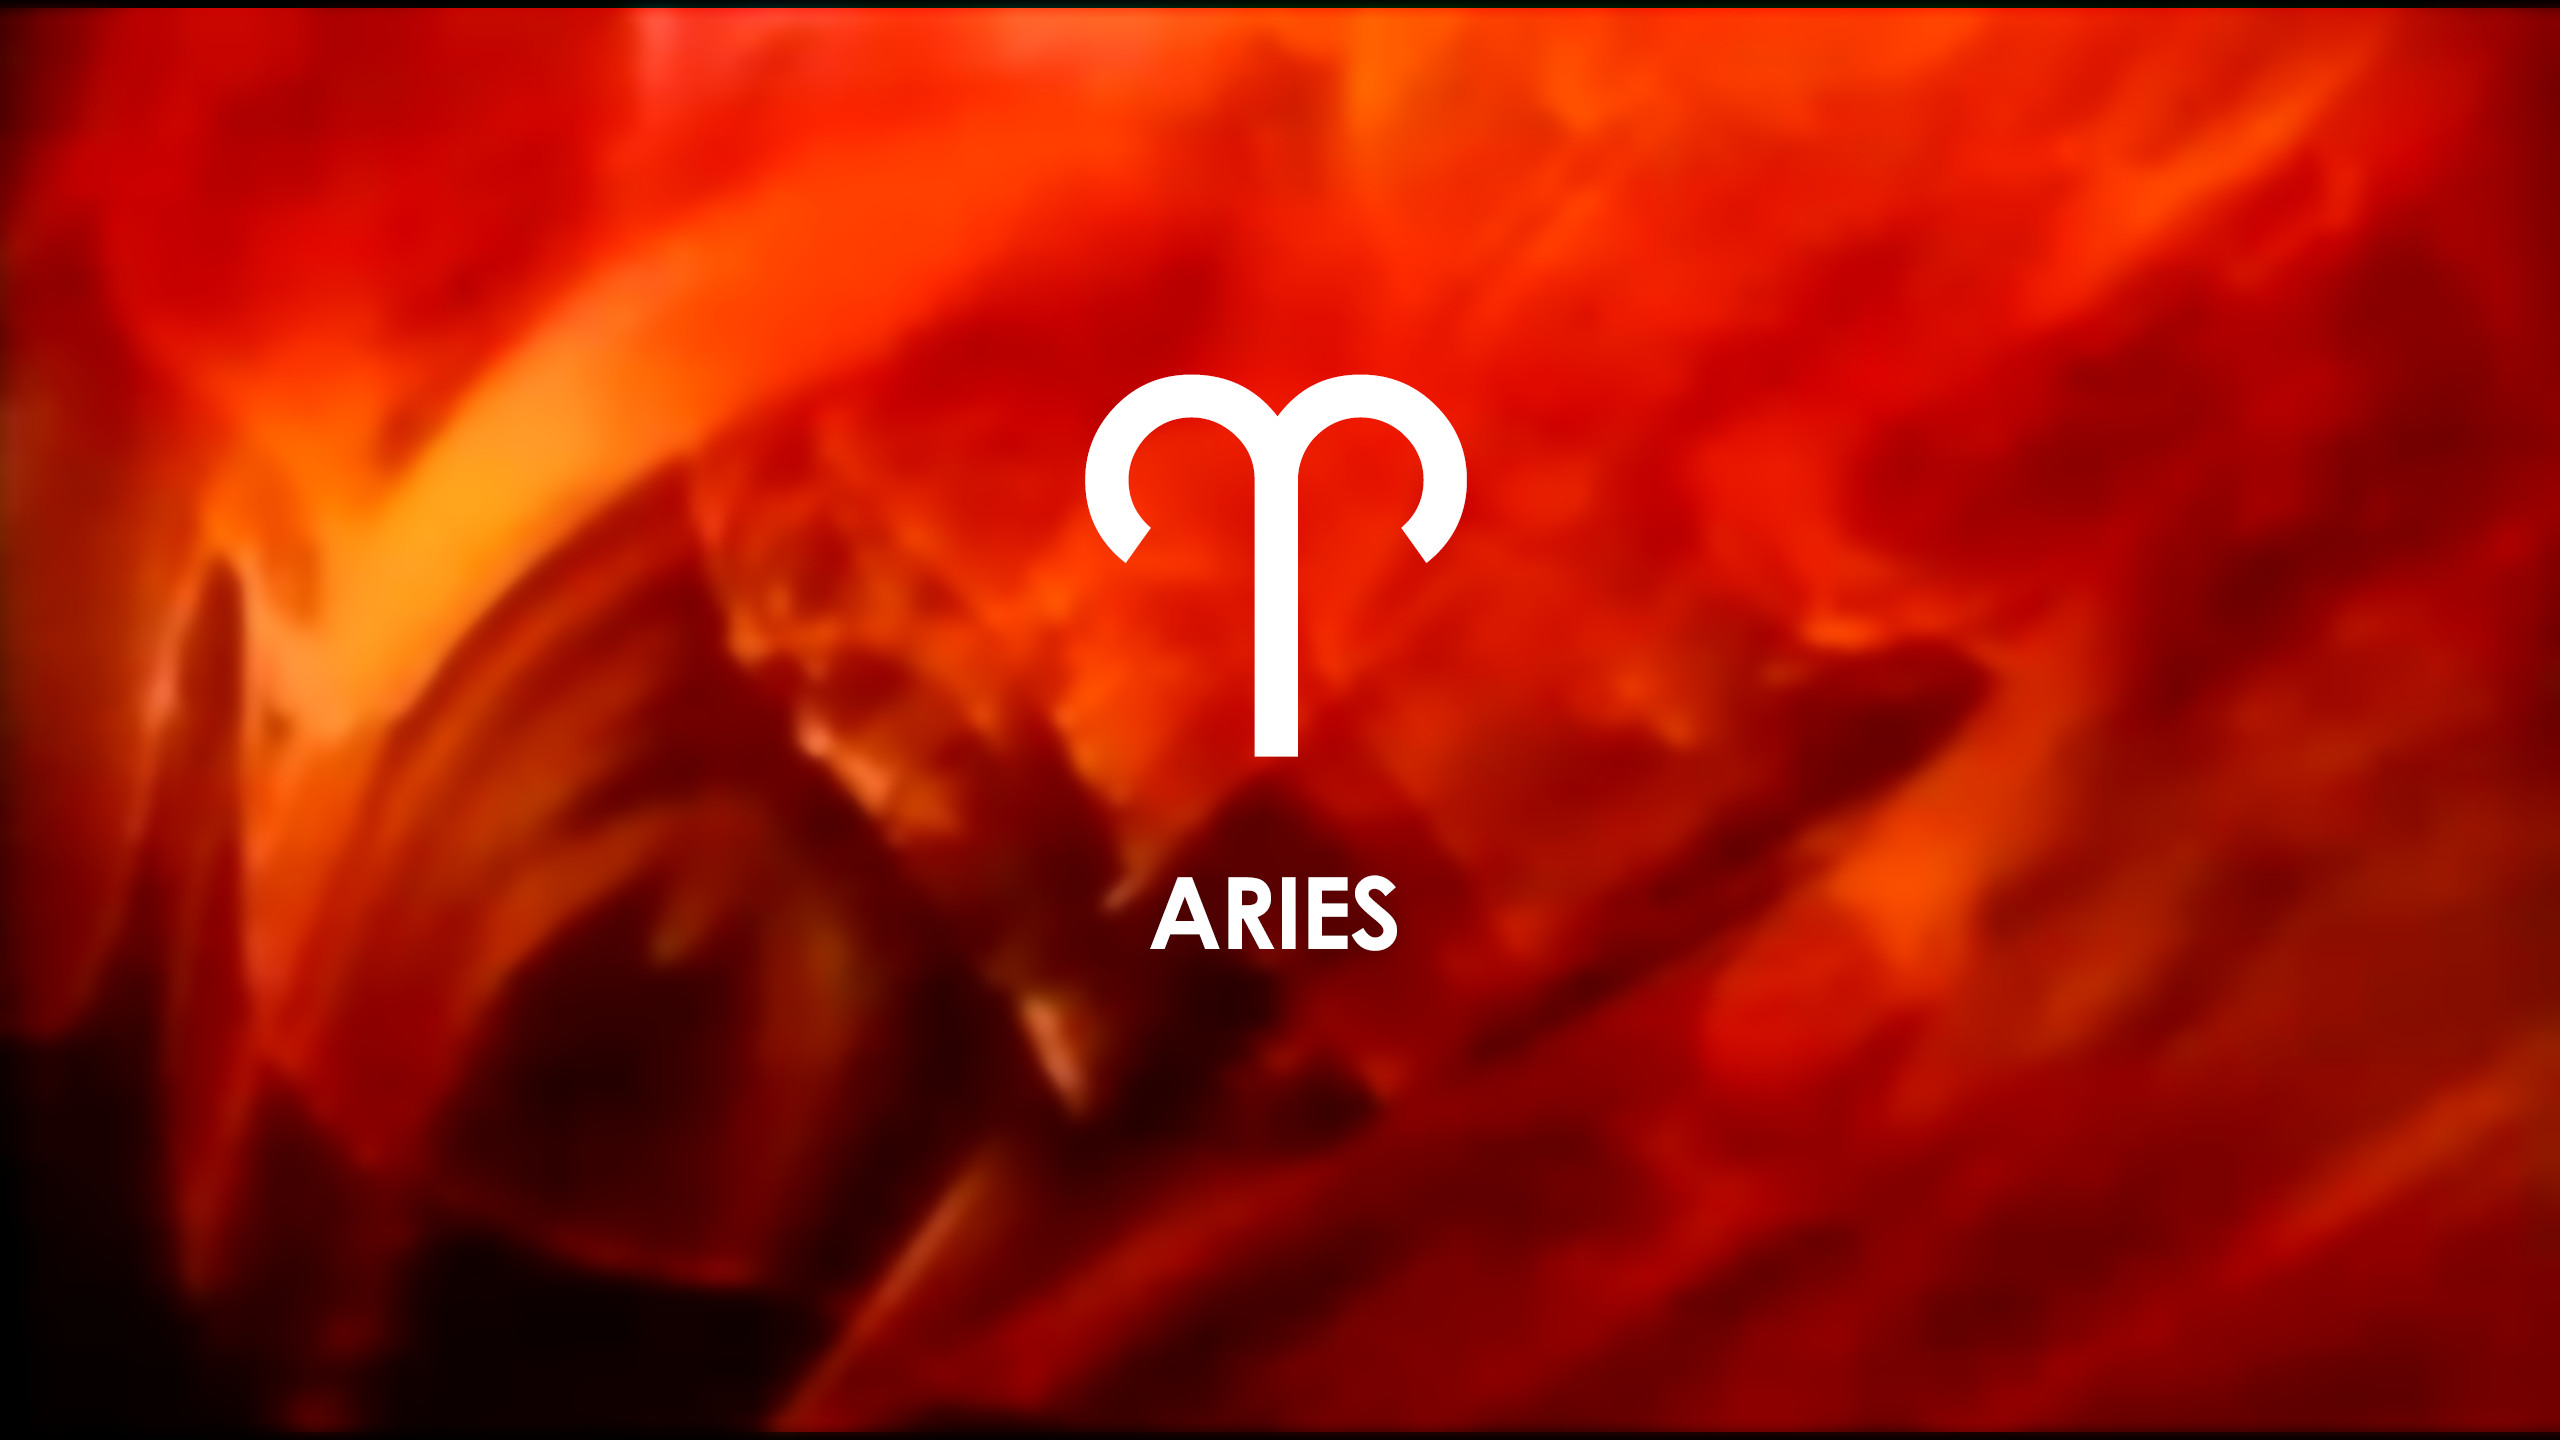 2560x1440 Aries Background for Desktop - Page 2 of 3 - wallpaper.wiki